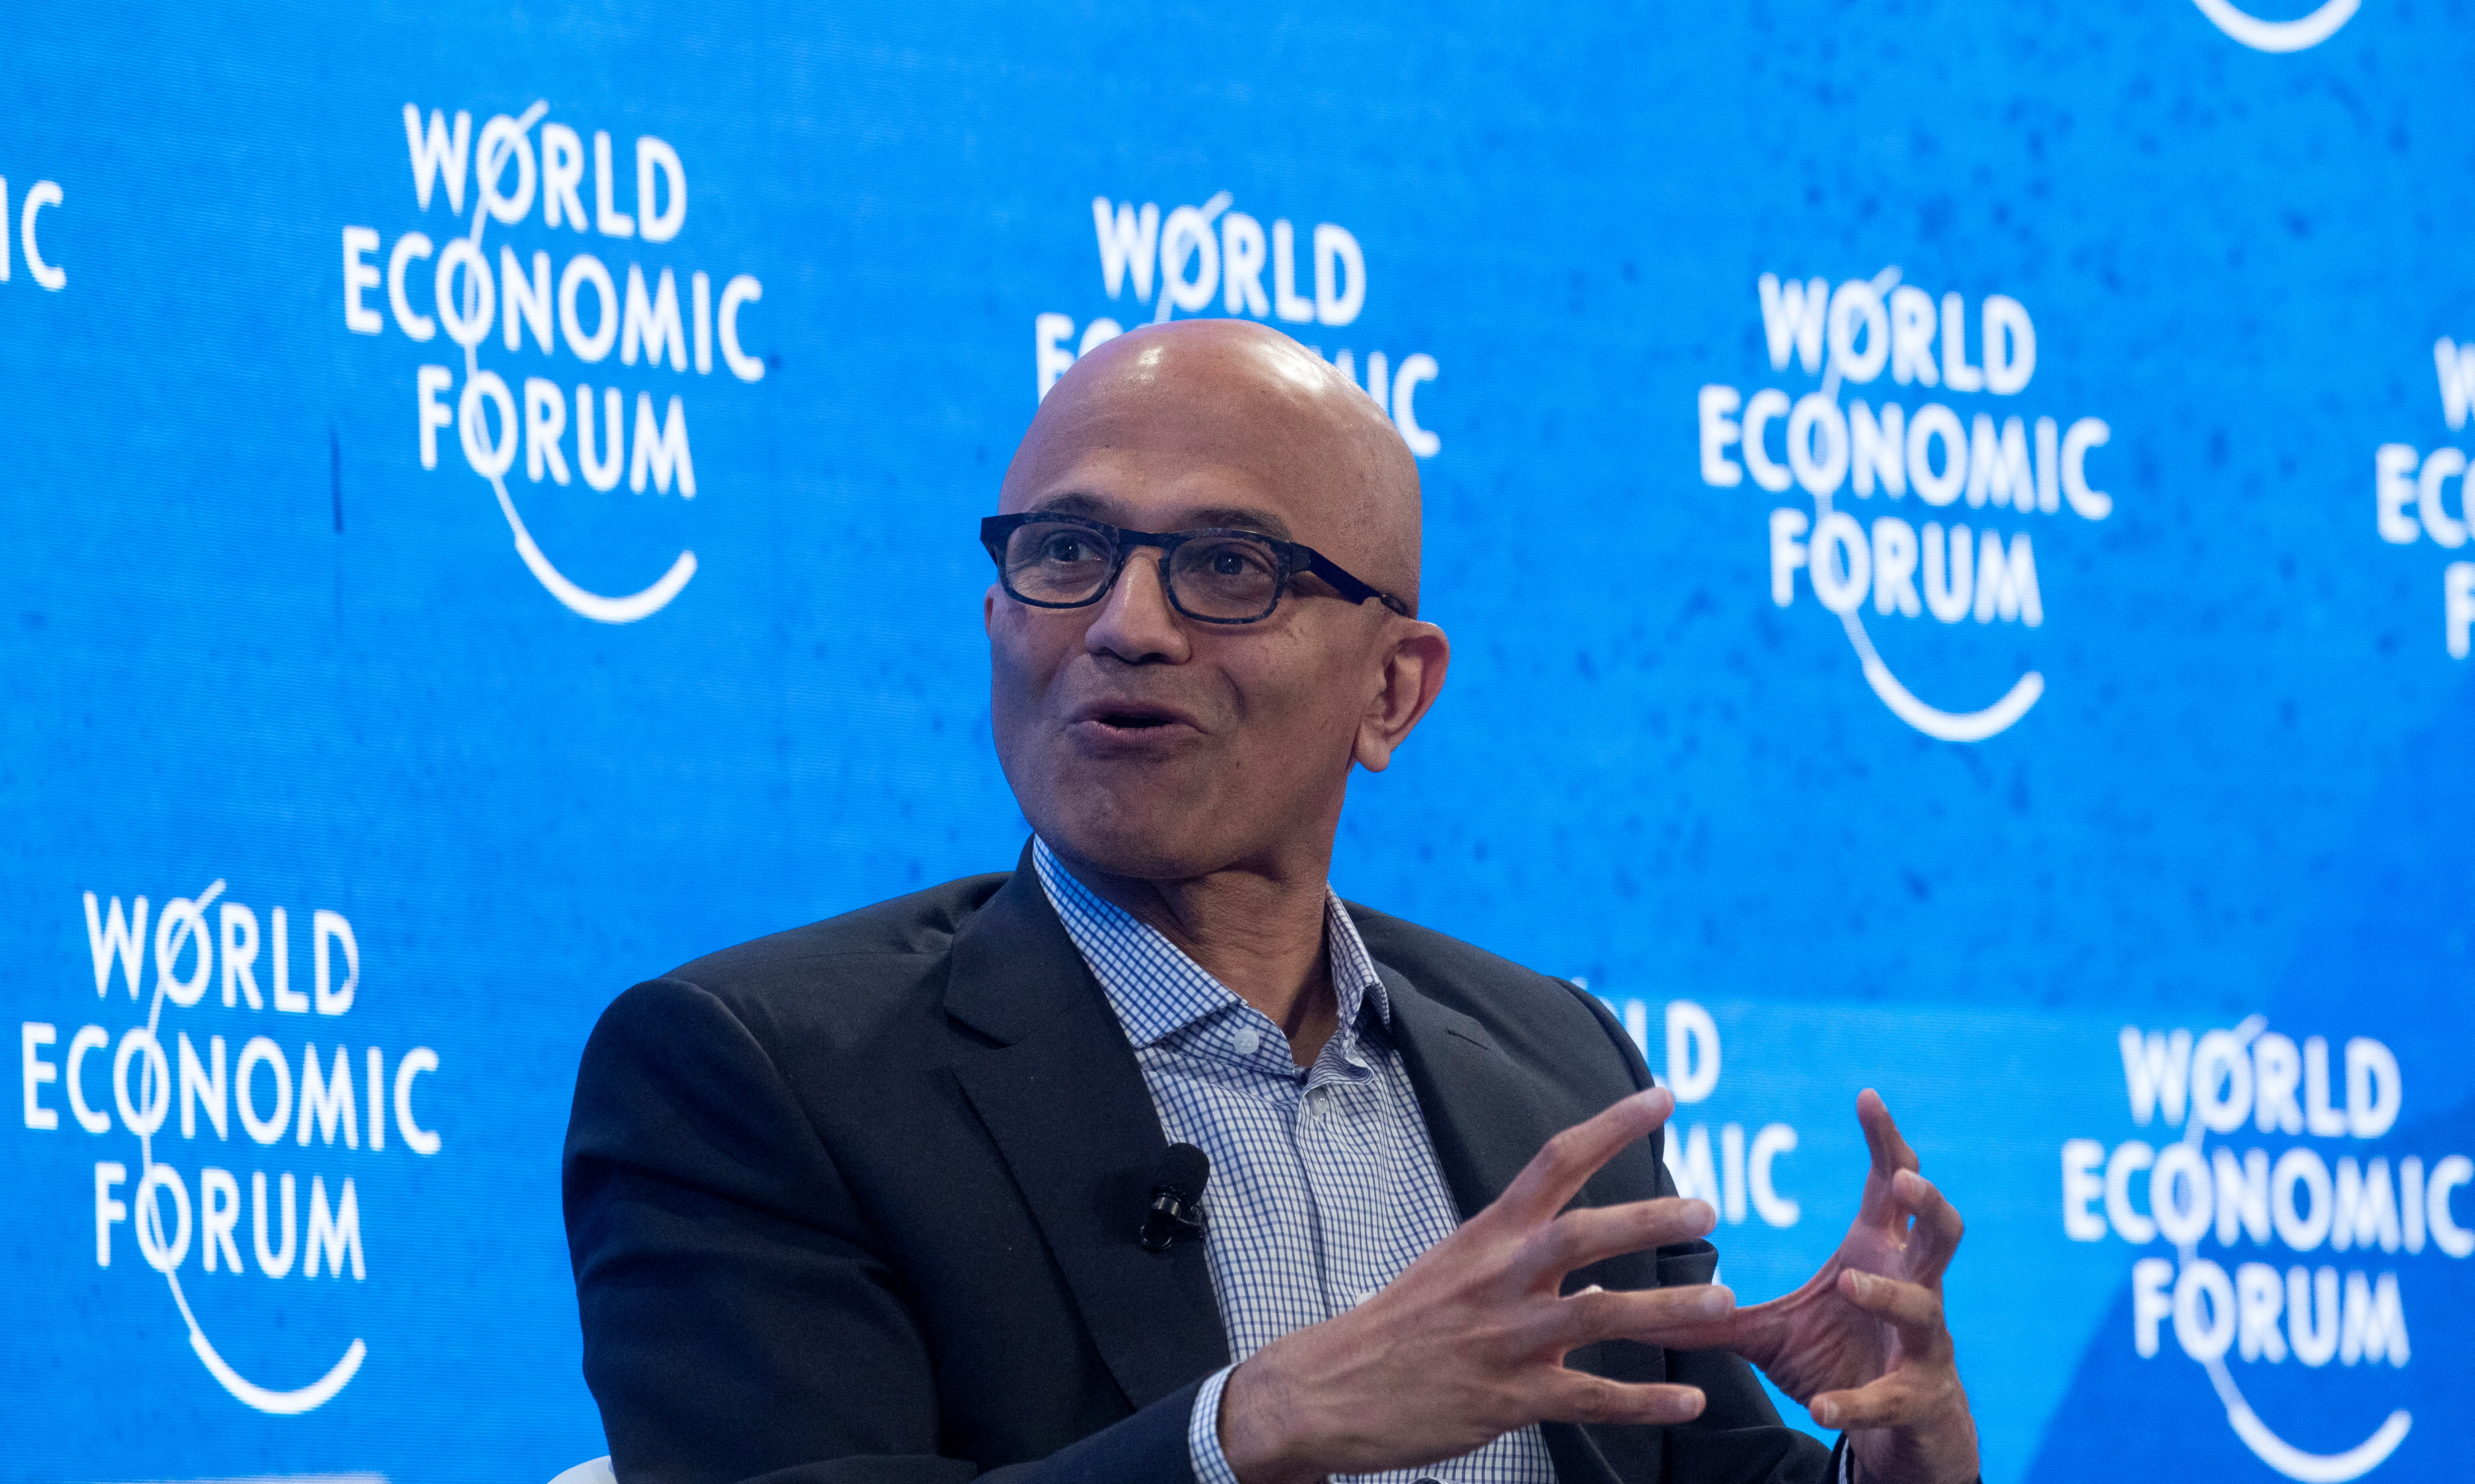 CEO of Microsoft Nadella speaks during a discussion at the World Economic Forum in Davos